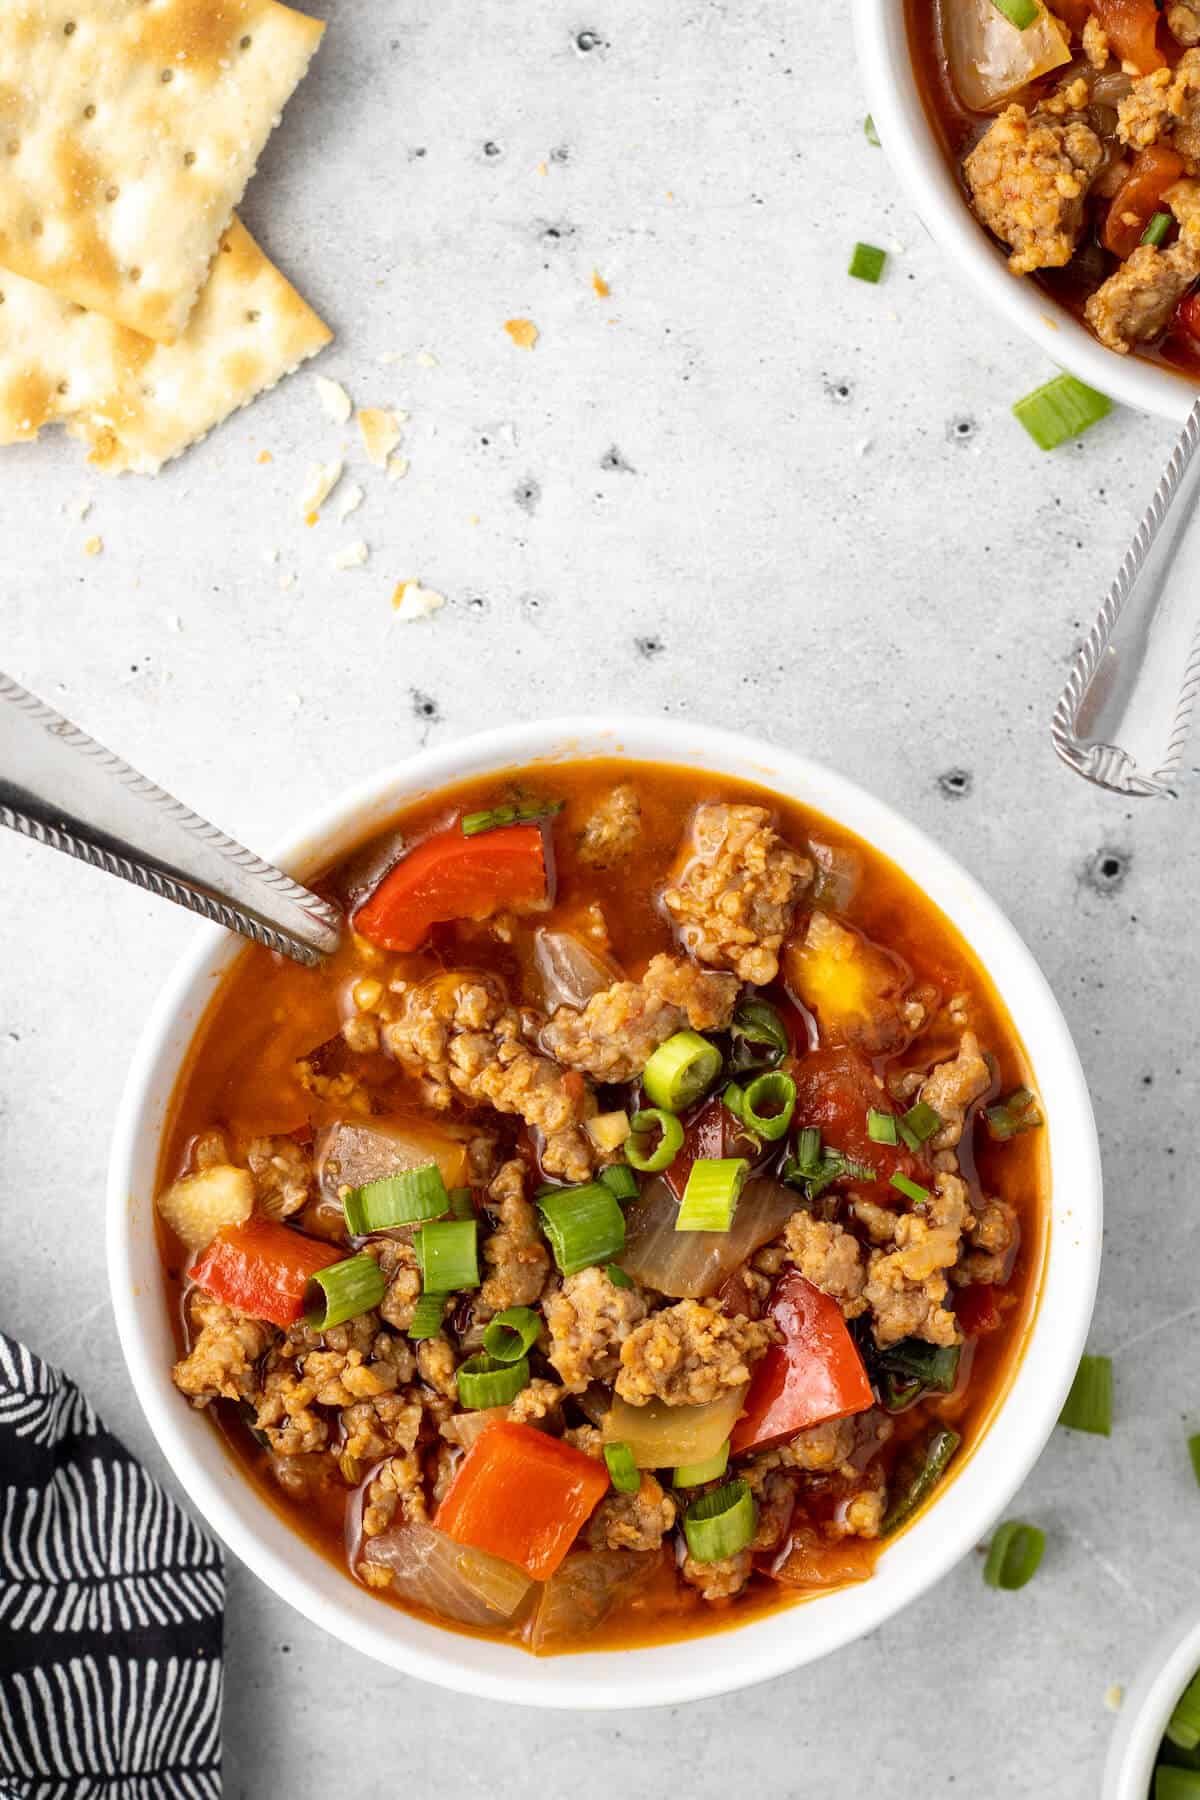 A bowl of spicy sausage soup with a spoon.